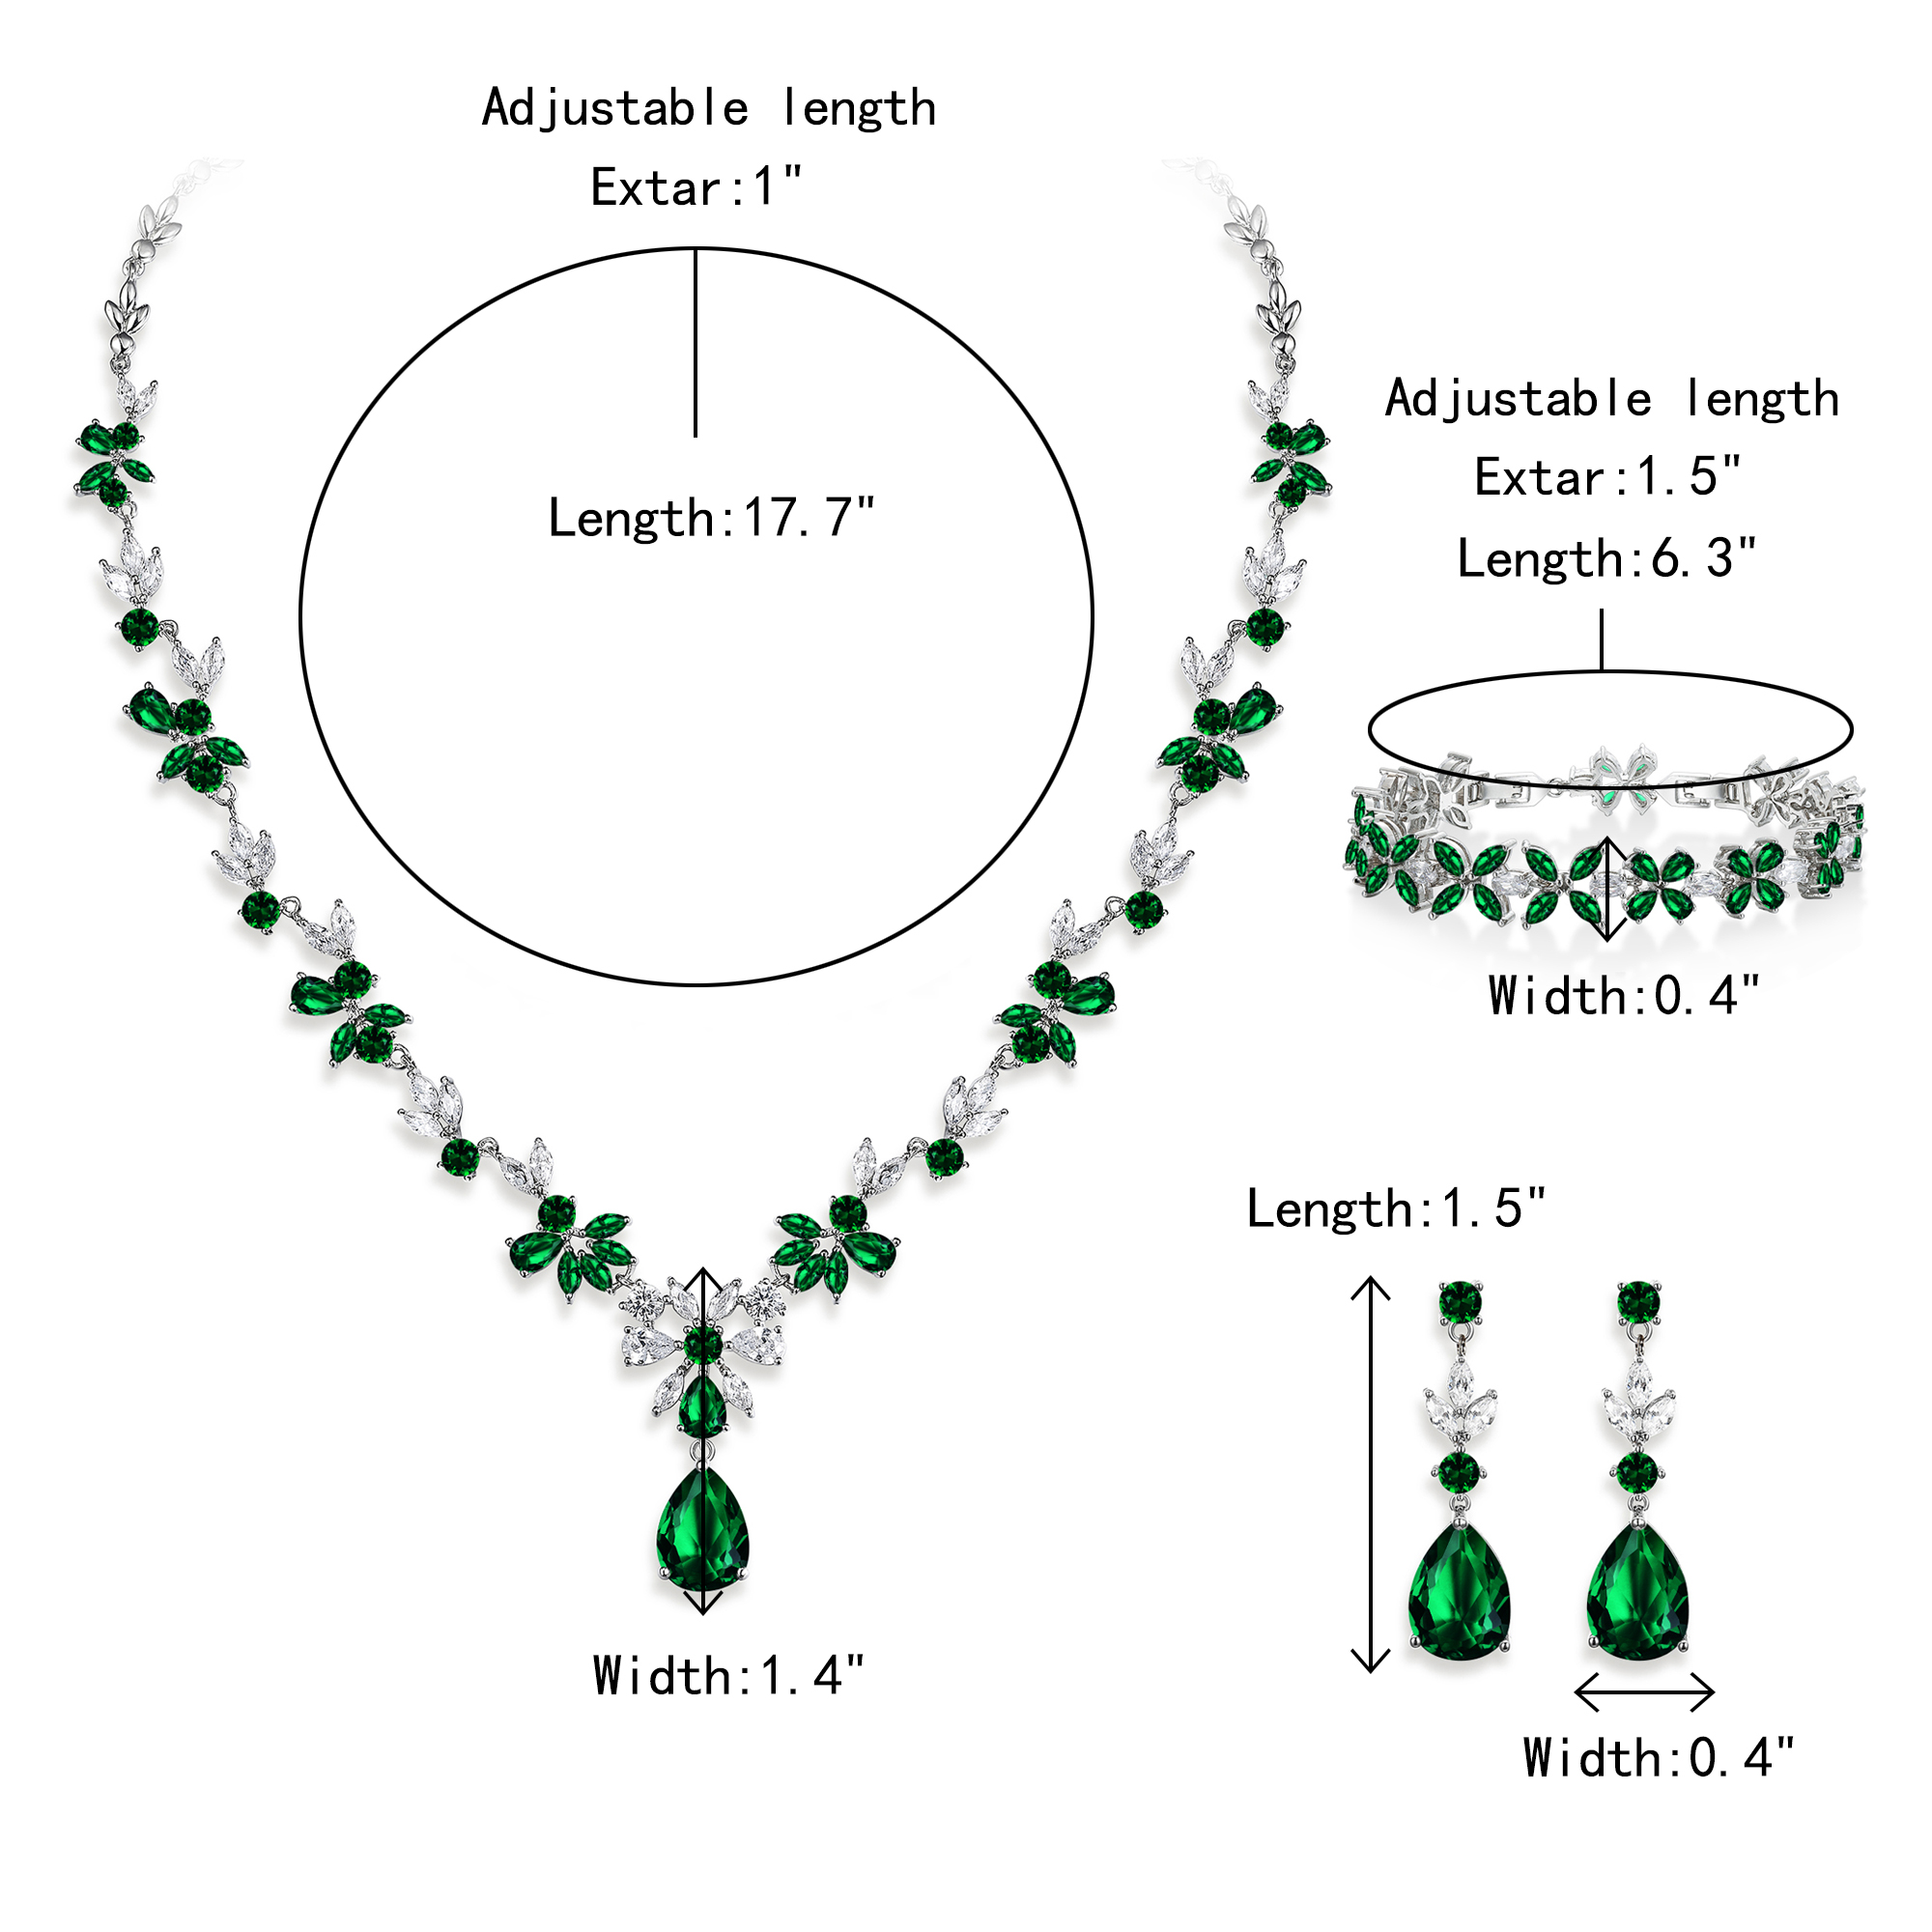 Wedure Wedding Jewelry Sets for Women, Green Marquise Cubic Zirconia Cluster Flower Bridal Necklace Dangle Earrings Bracelet Set for Bridesmaid Bride - image 5 of 5